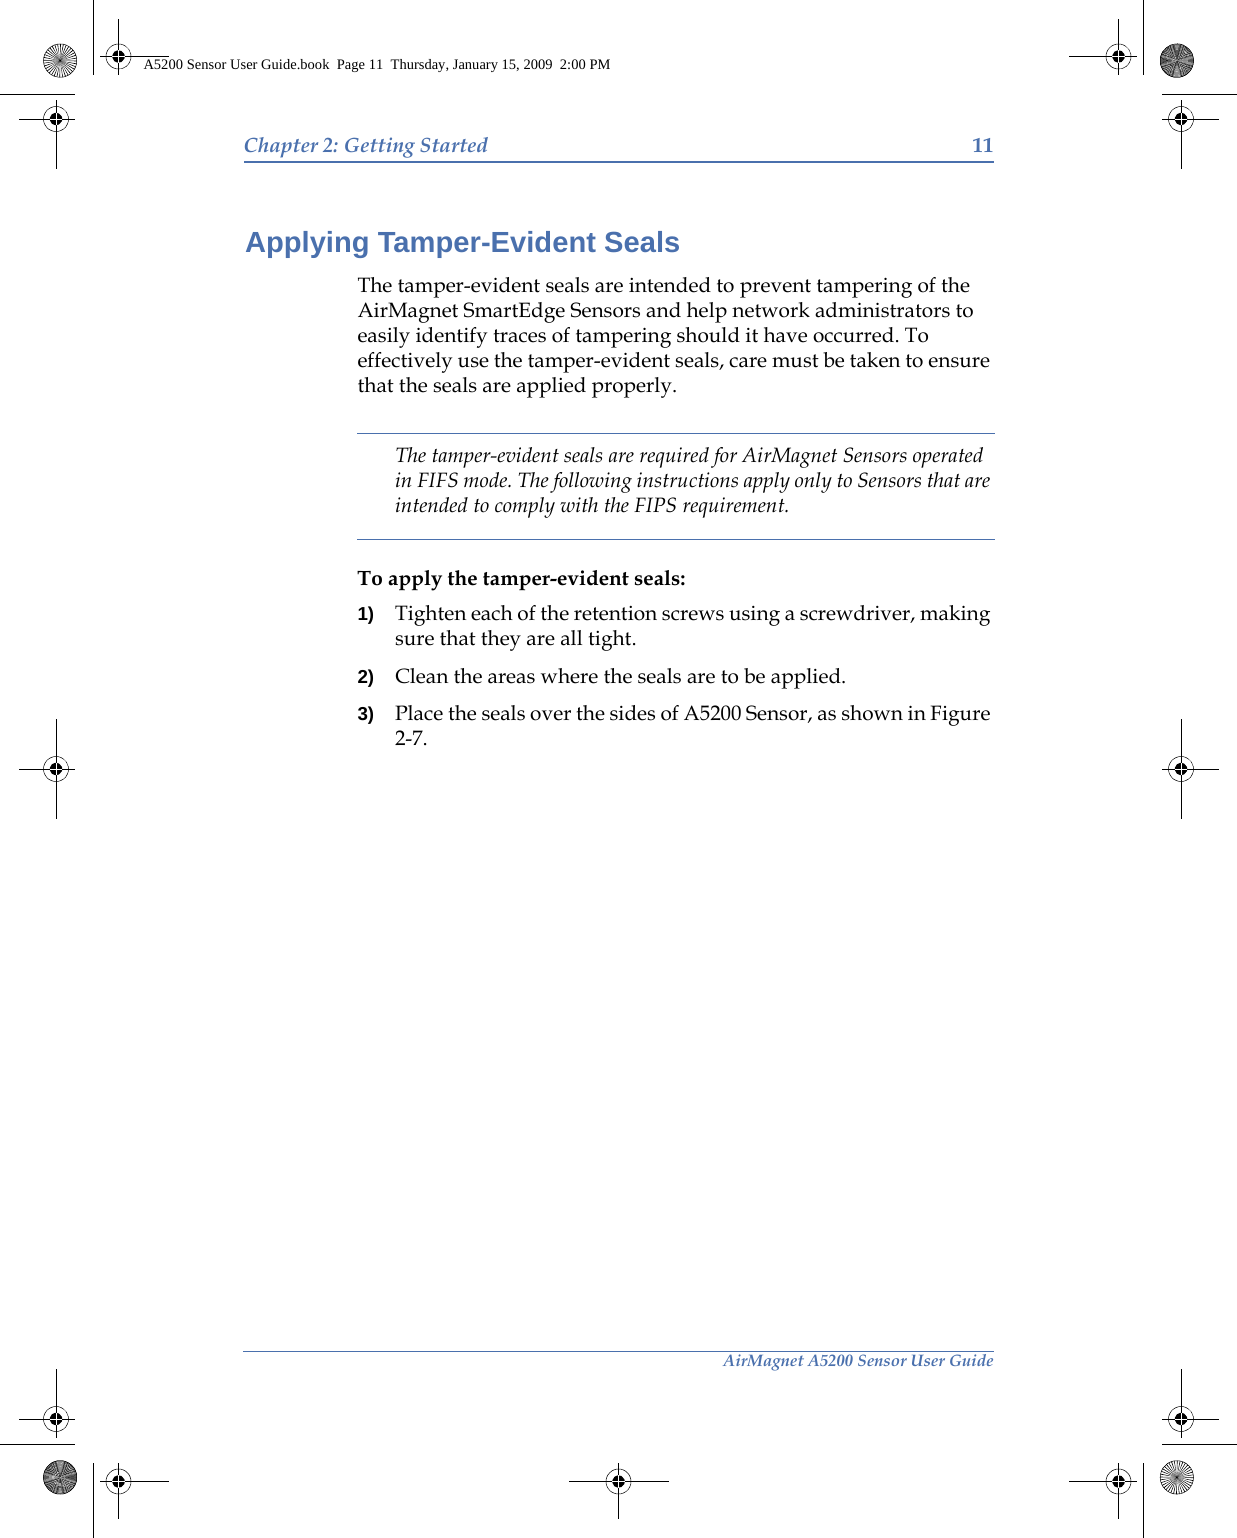 AirMagnet A5200 Sensor User GuideChapter 2: Getting Started 11Applying Tamper-Evident SealsThe tamper-evident seals are intended to prevent tampering of the AirMagnet SmartEdge Sensors and help network administrators to easily identify traces of tampering should it have occurred. To effectively use the tamper-evident seals, care must be taken to ensure that the seals are applied properly.The tamper-evident seals are required for AirMagnet Sensors operated in FIFS mode. The following instructions apply only to Sensors that are intended to comply with the FIPS requirement. To apply the tamper-evident seals:1) Tighten each of the retention screws using a screwdriver, making sure that they are all tight.2) Clean the areas where the seals are to be applied.3) Place the seals over the sides of A5200 Sensor, as shown in Figure 2-7.A5200 Sensor User Guide.book  Page 11  Thursday, January 15, 2009  2:00 PM